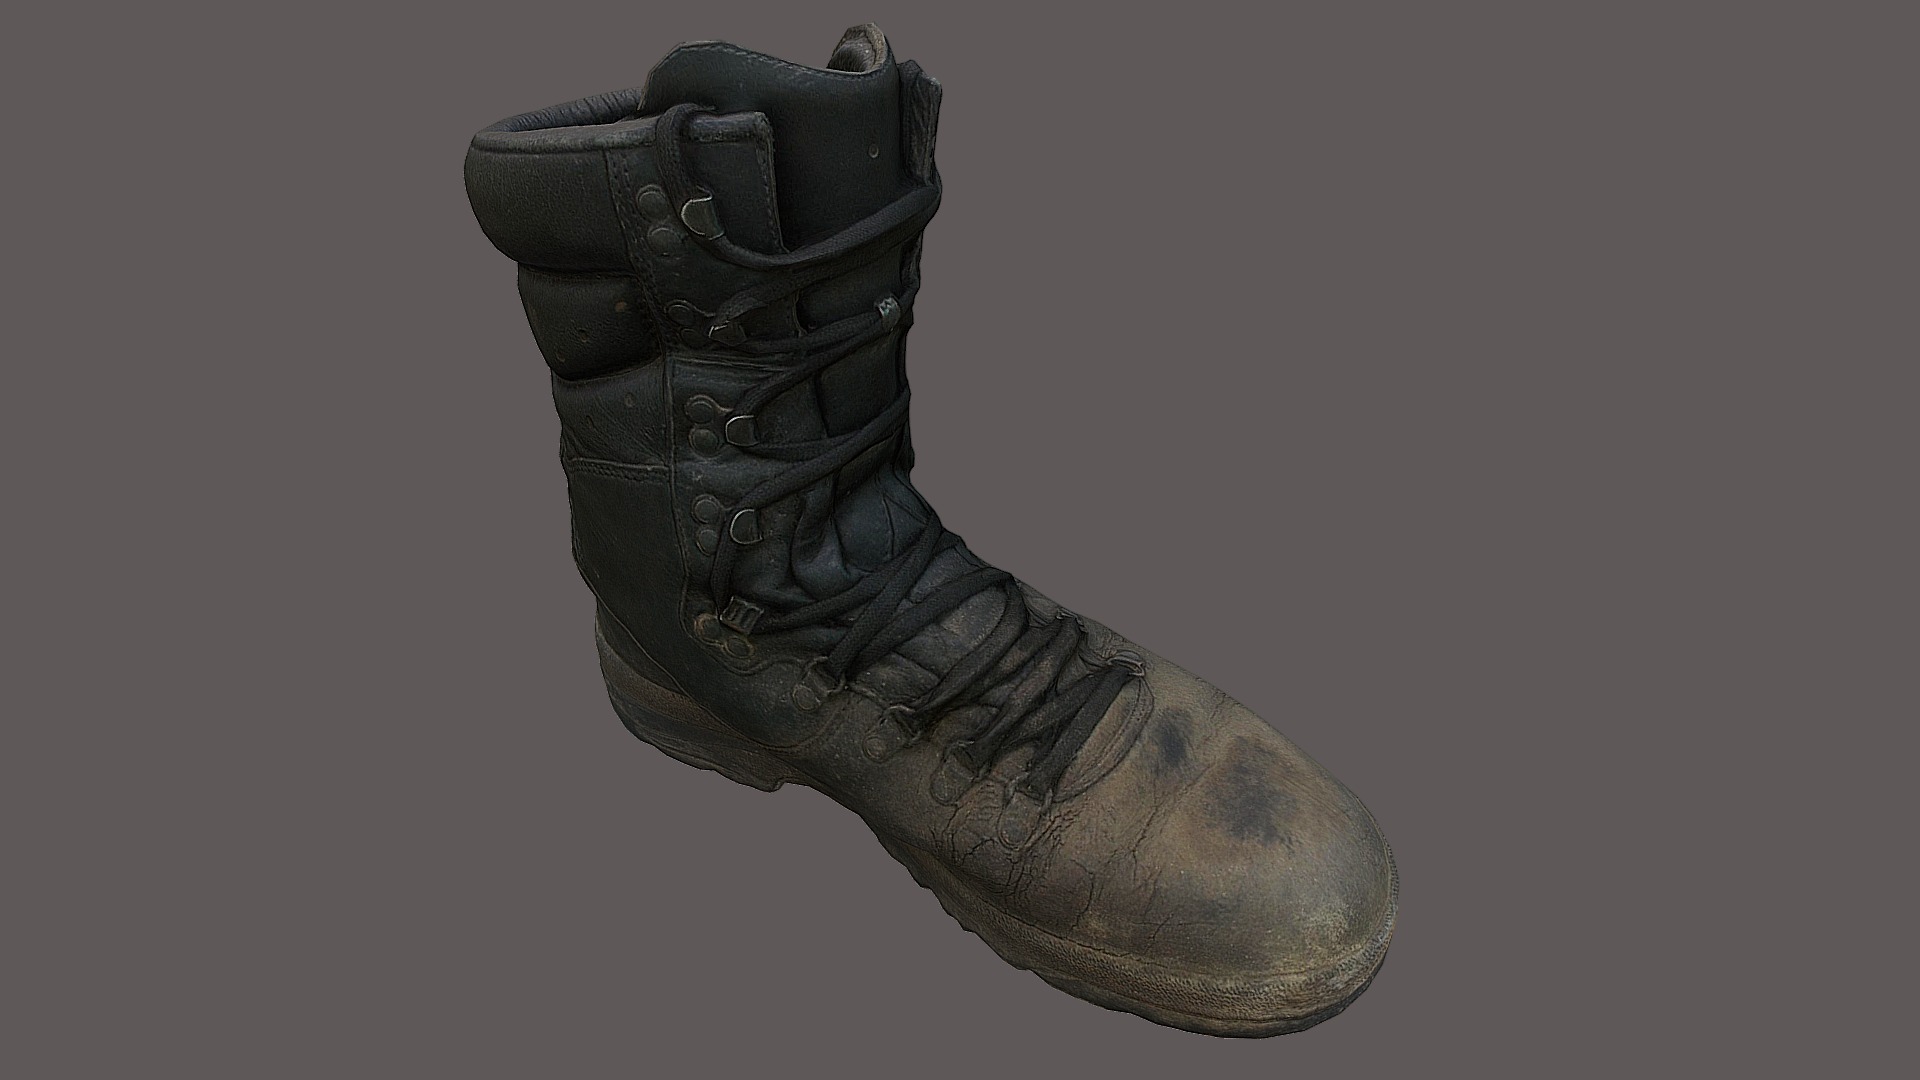 3D model Boot low poly 3D model - This is a 3D model of the Boot low poly 3D model. The 3D model is about a close-up of a glove.